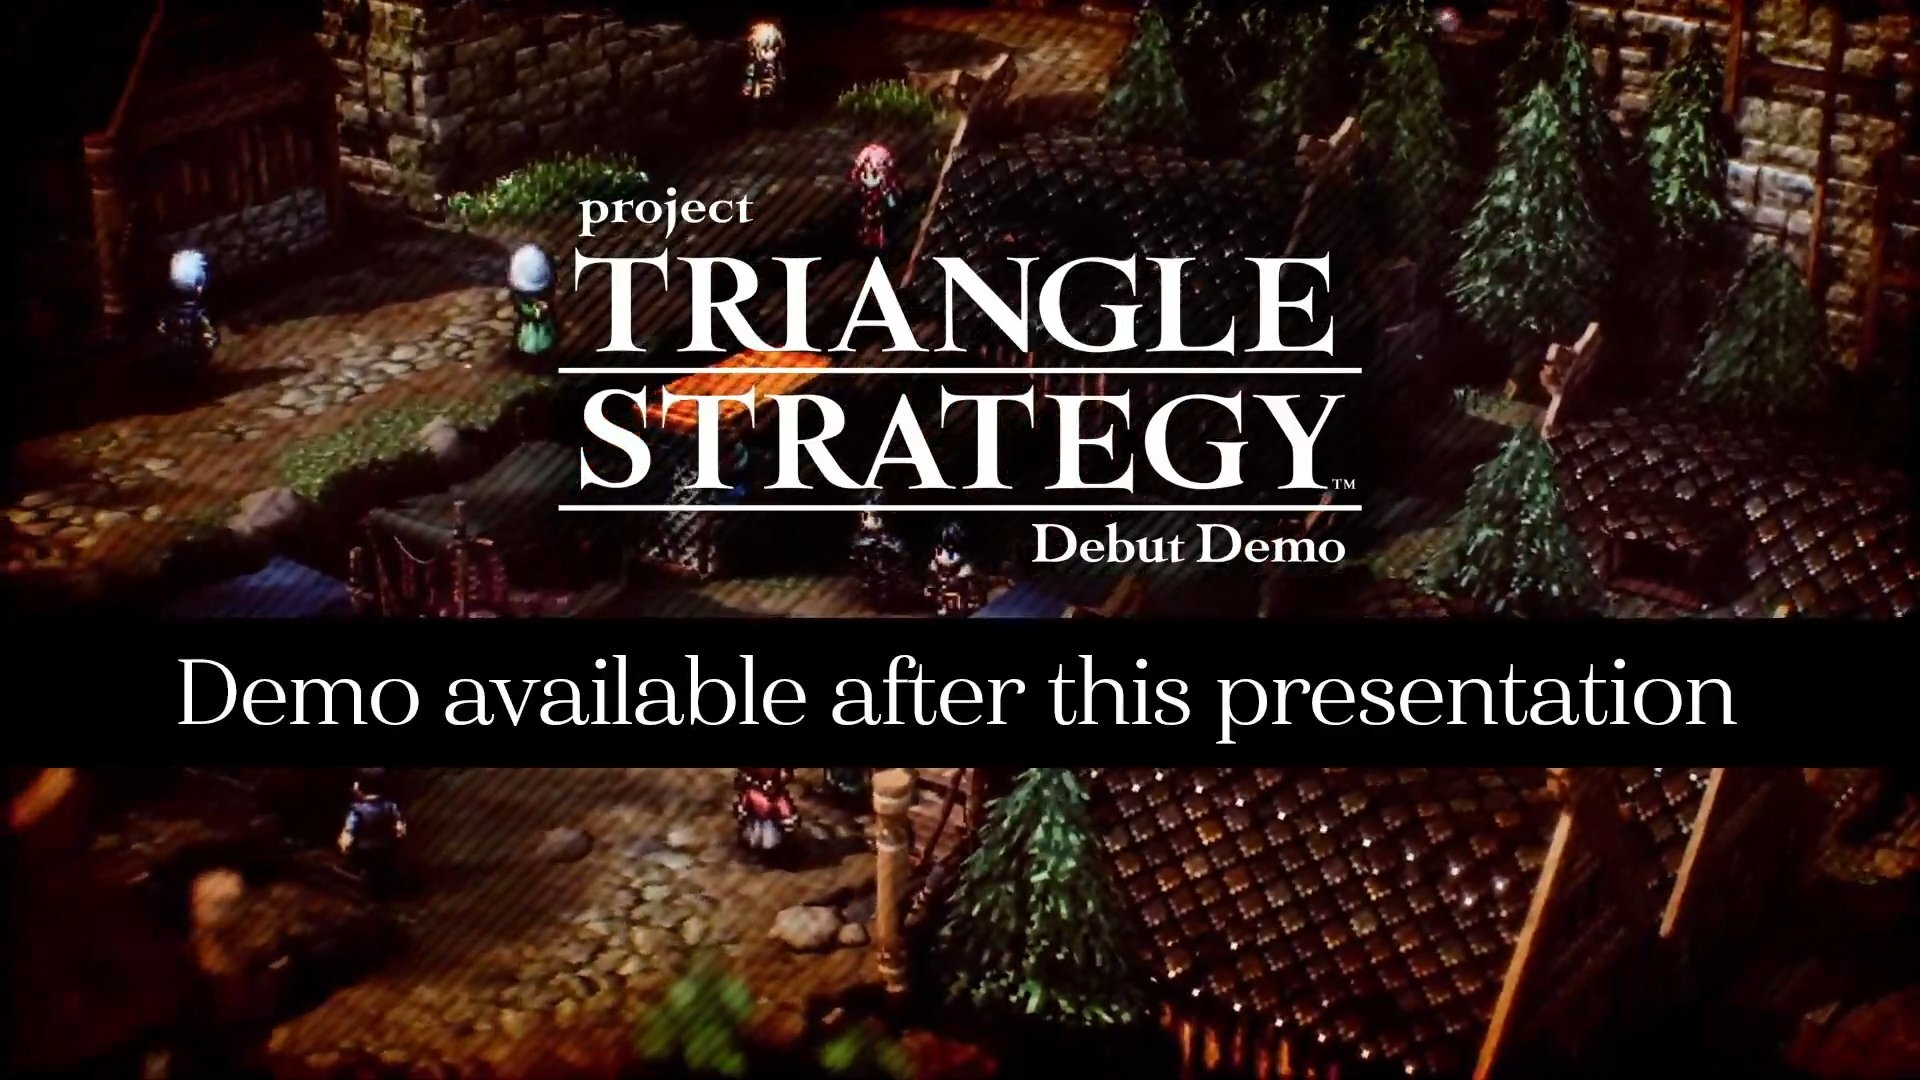 Nintendo Direct Project Triangle Strategy